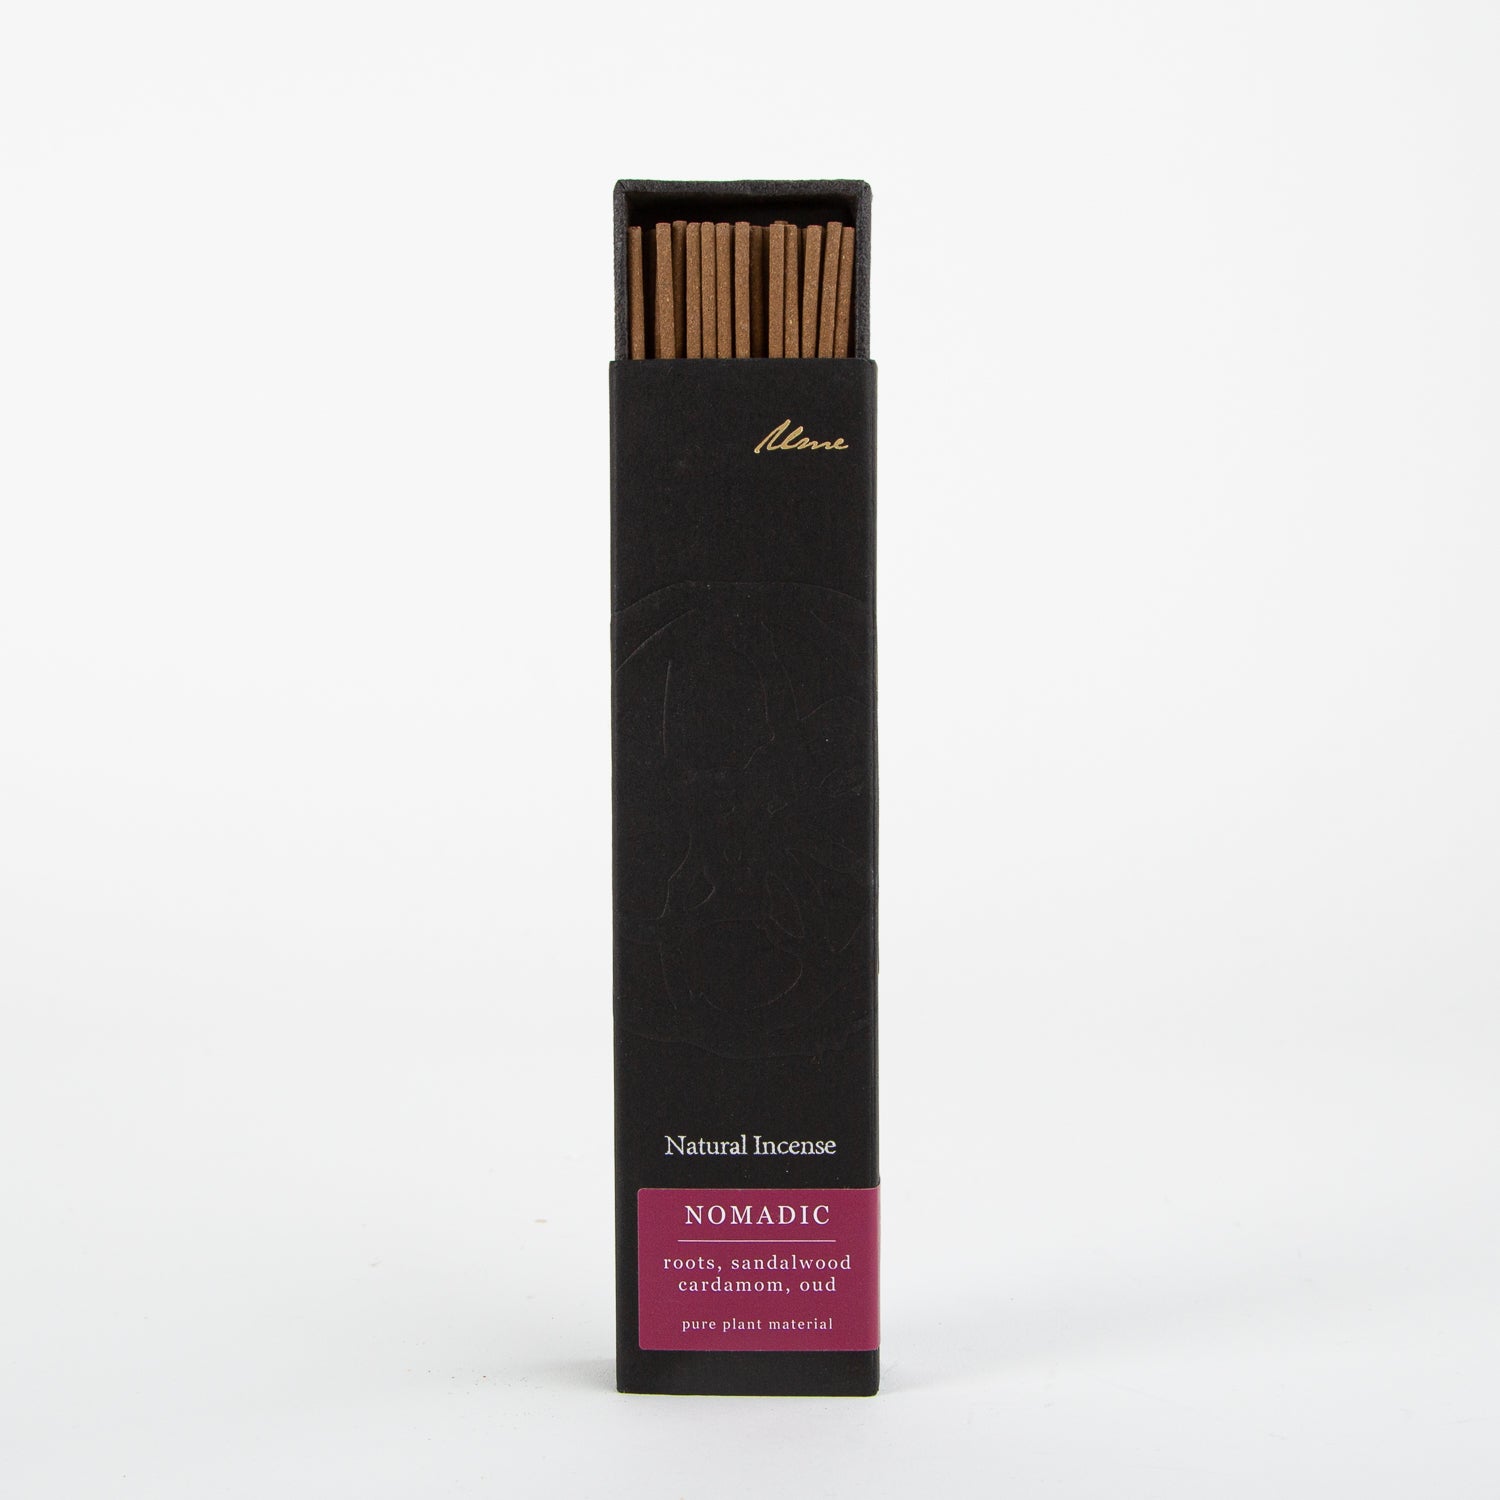 nomadic natural incense sticks by Ume collection at Secret Location